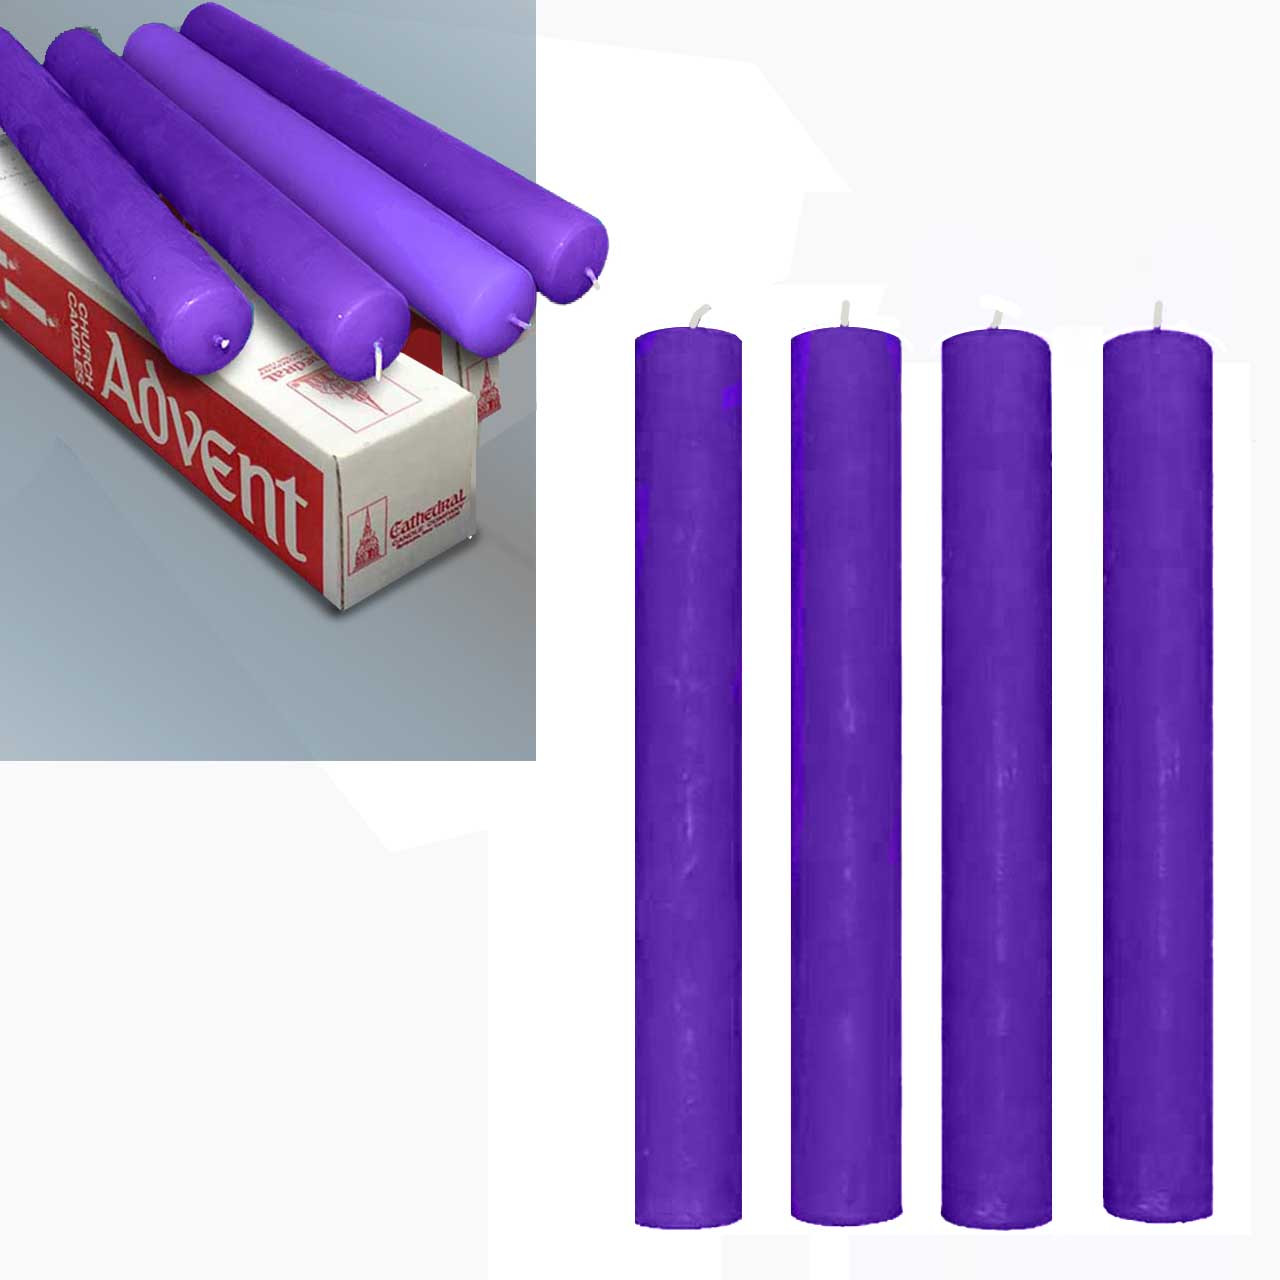 1-1/2"x12" Purple 51% Beeswax Advent Candles: Set of 4